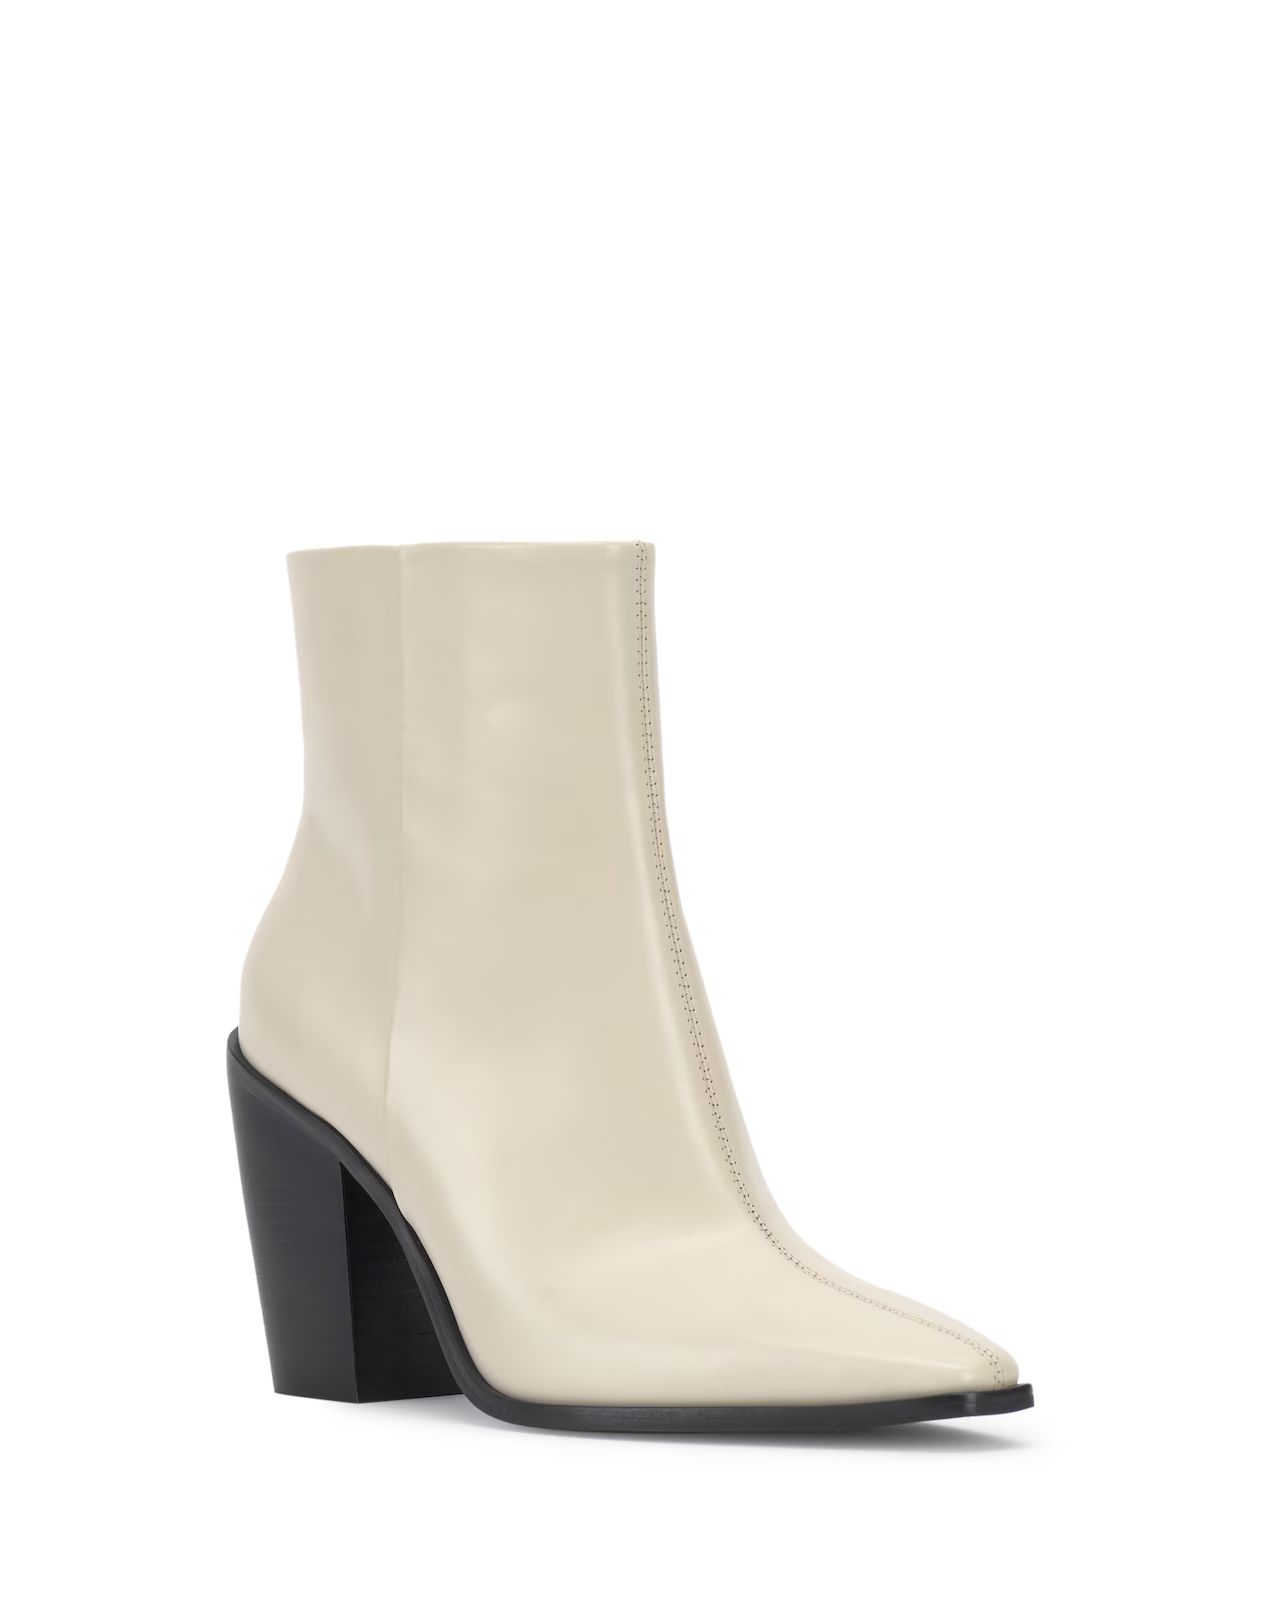 Vince Camuto Allie Bootie | Vince Camuto